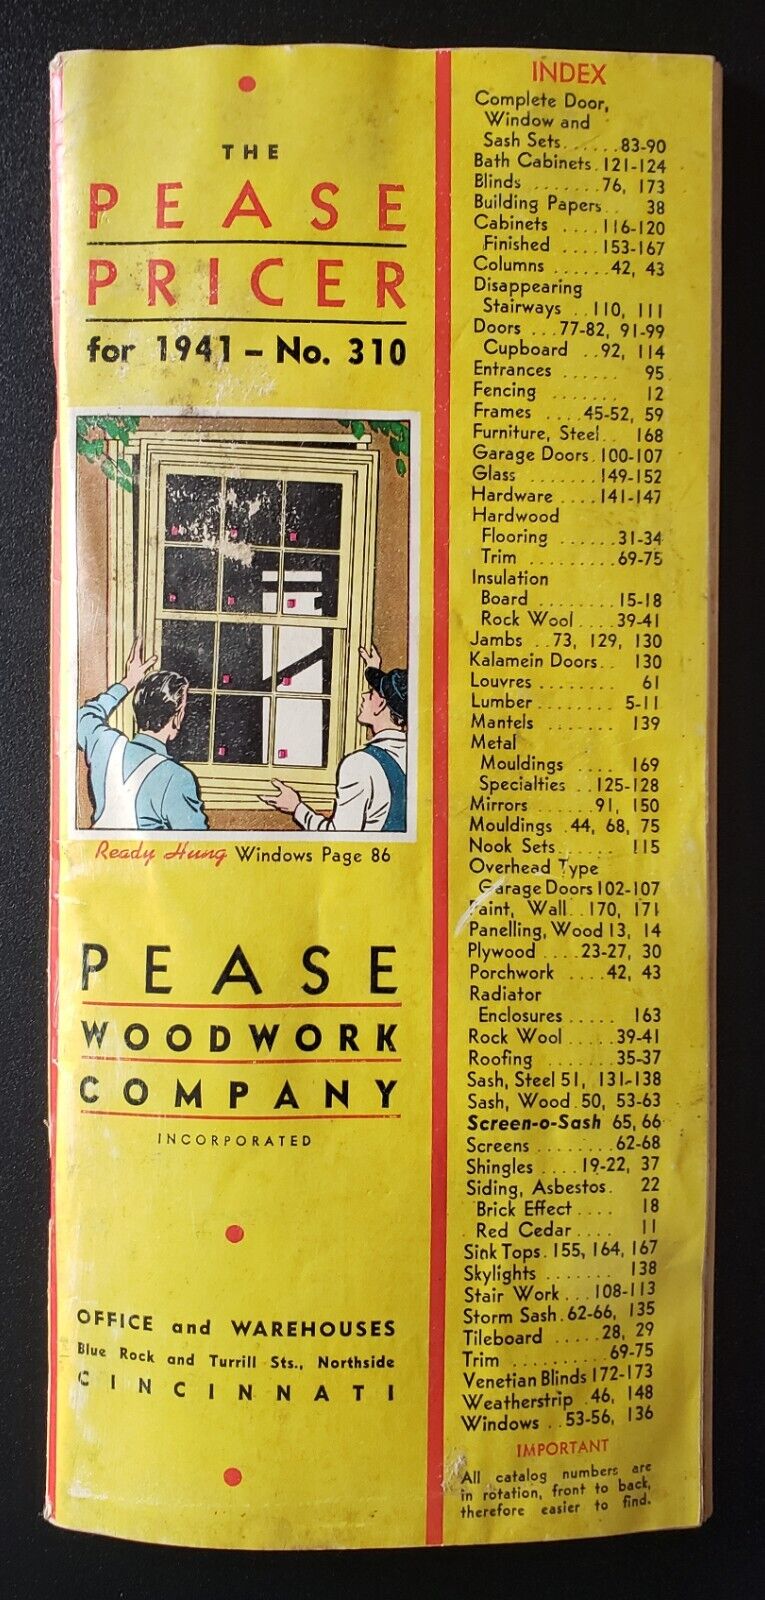 1941 Pease Woodwork Company Catalog. THE PEASE PRICER